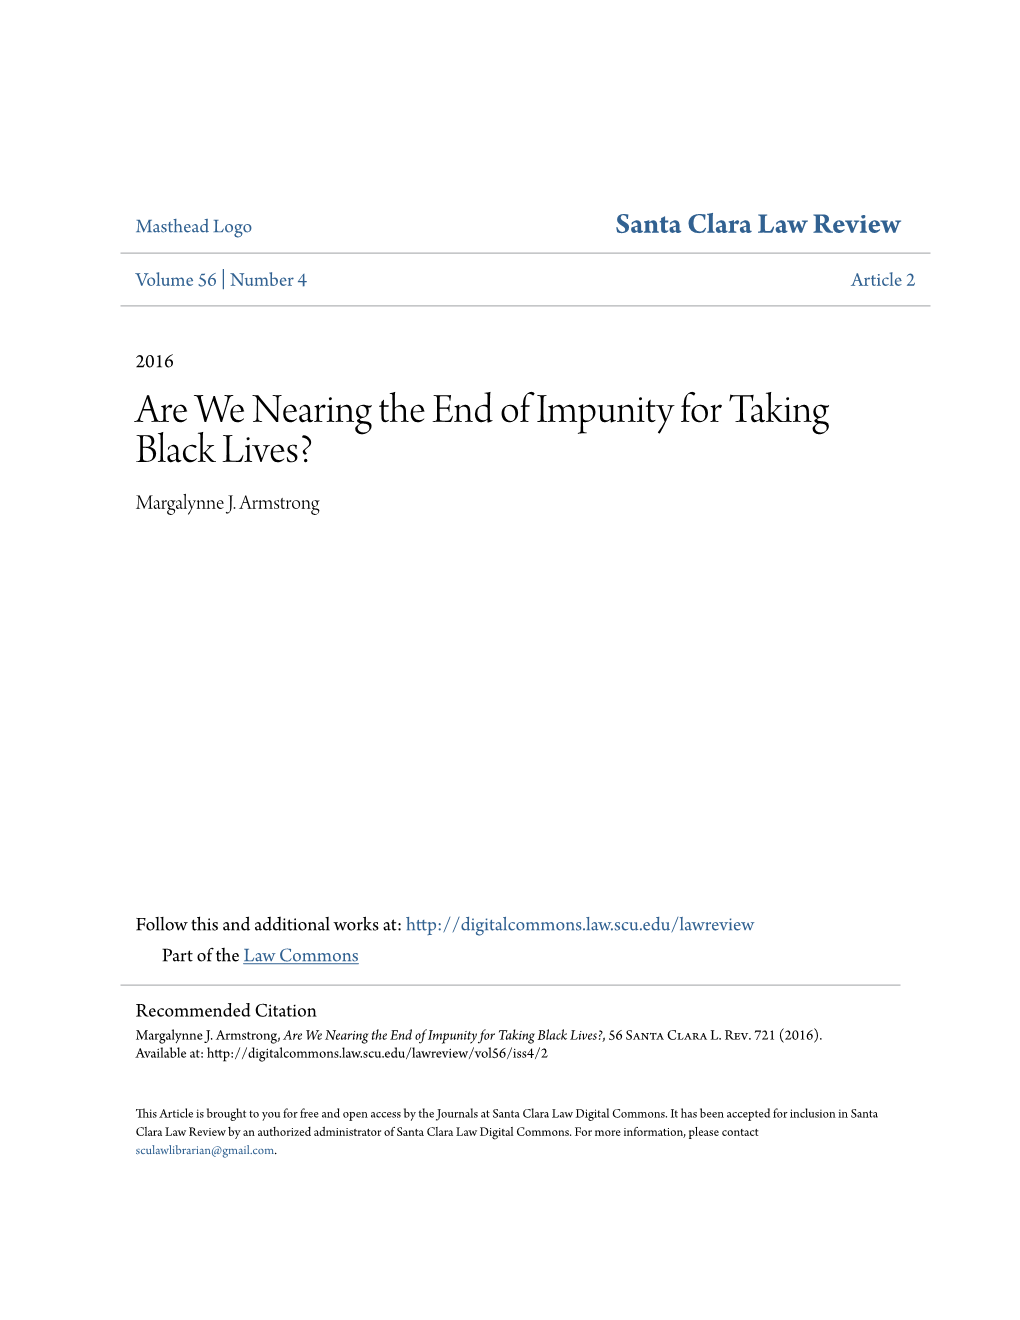 Are We Nearing the End of Impunity for Taking Black Lives? Margalynne J